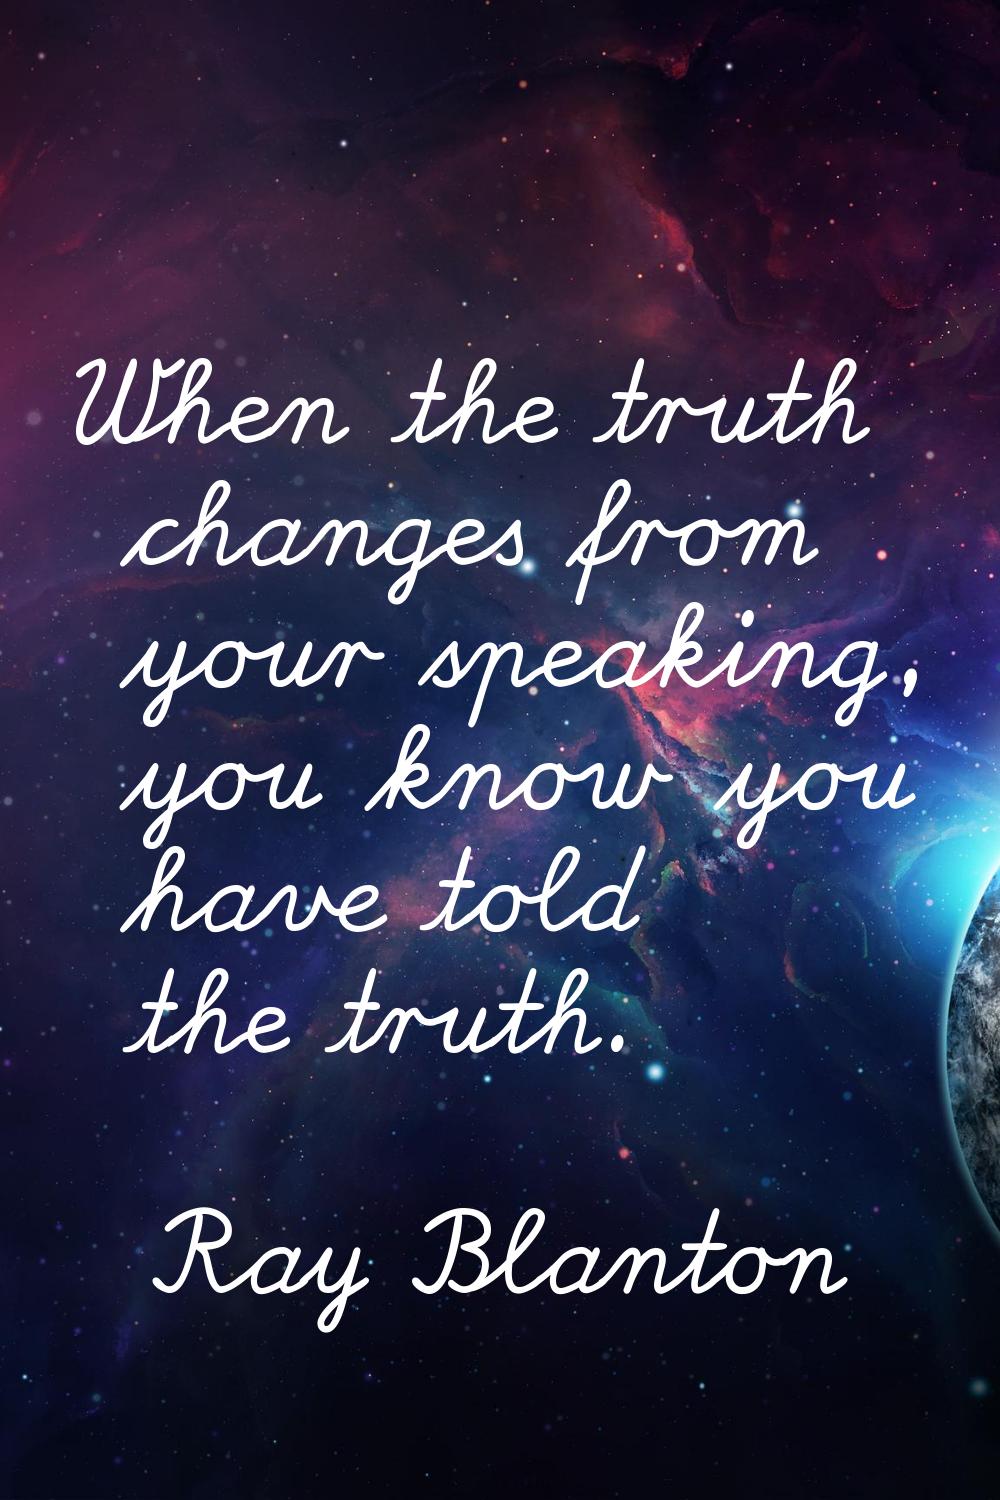 When the truth changes from your speaking, you know you have told the truth.